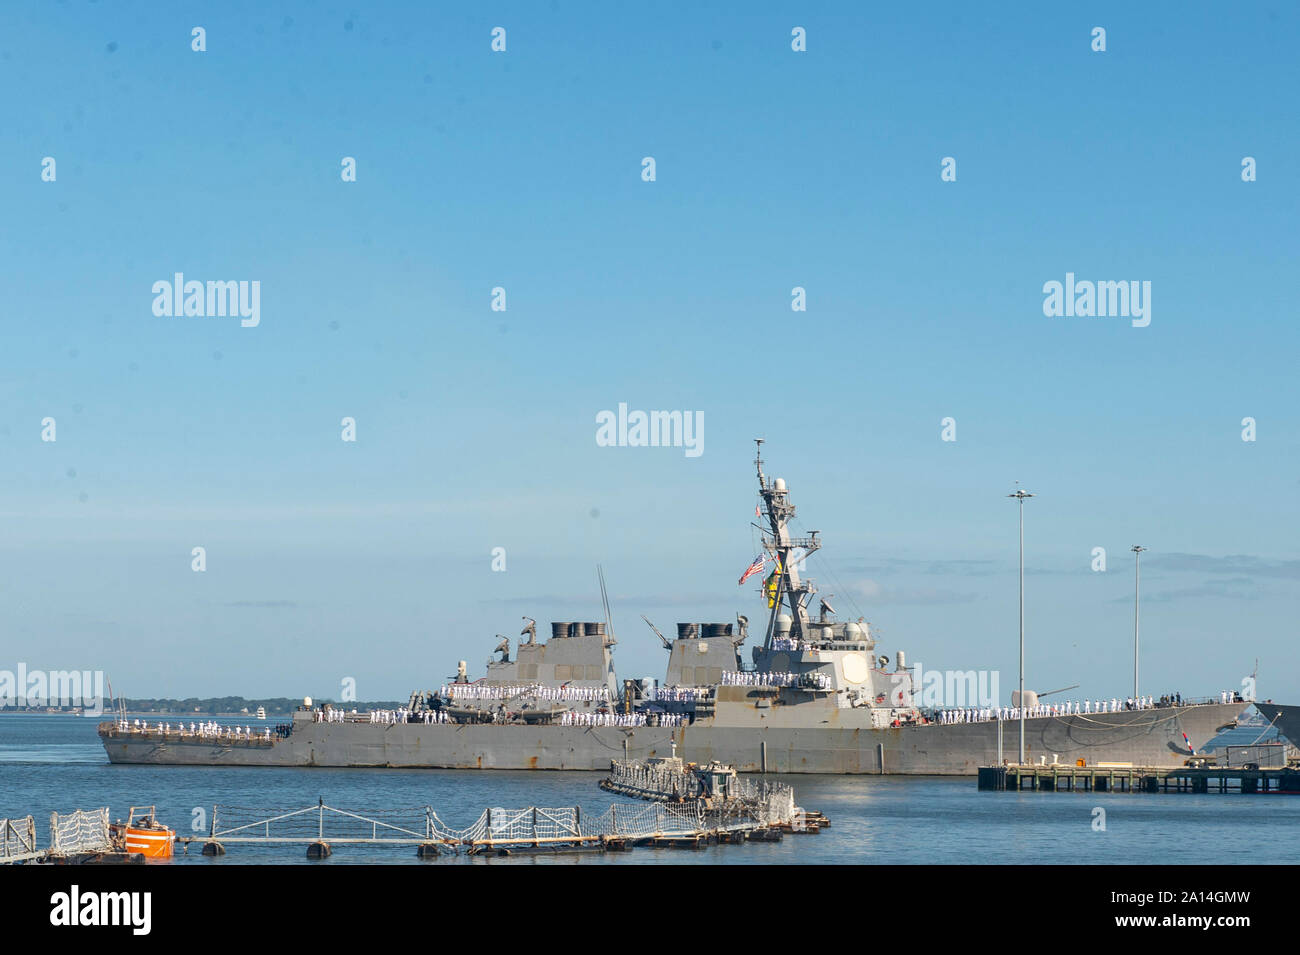 190920-N-DV626-0011  NORFOLK, Va. (Sept. 20, 2019) The Arleigh-Burke class guided-missile destroyer USS McFaul (DDG 74) returns to Naval Station Norfolk. McFaul completed an eight-month deployment to the U.S. 5th and 6th fleet areas of operation. (U.S. Navy photo by Mass Communication Specialist 3rd Class Gian Prabhudas) Stock Photo